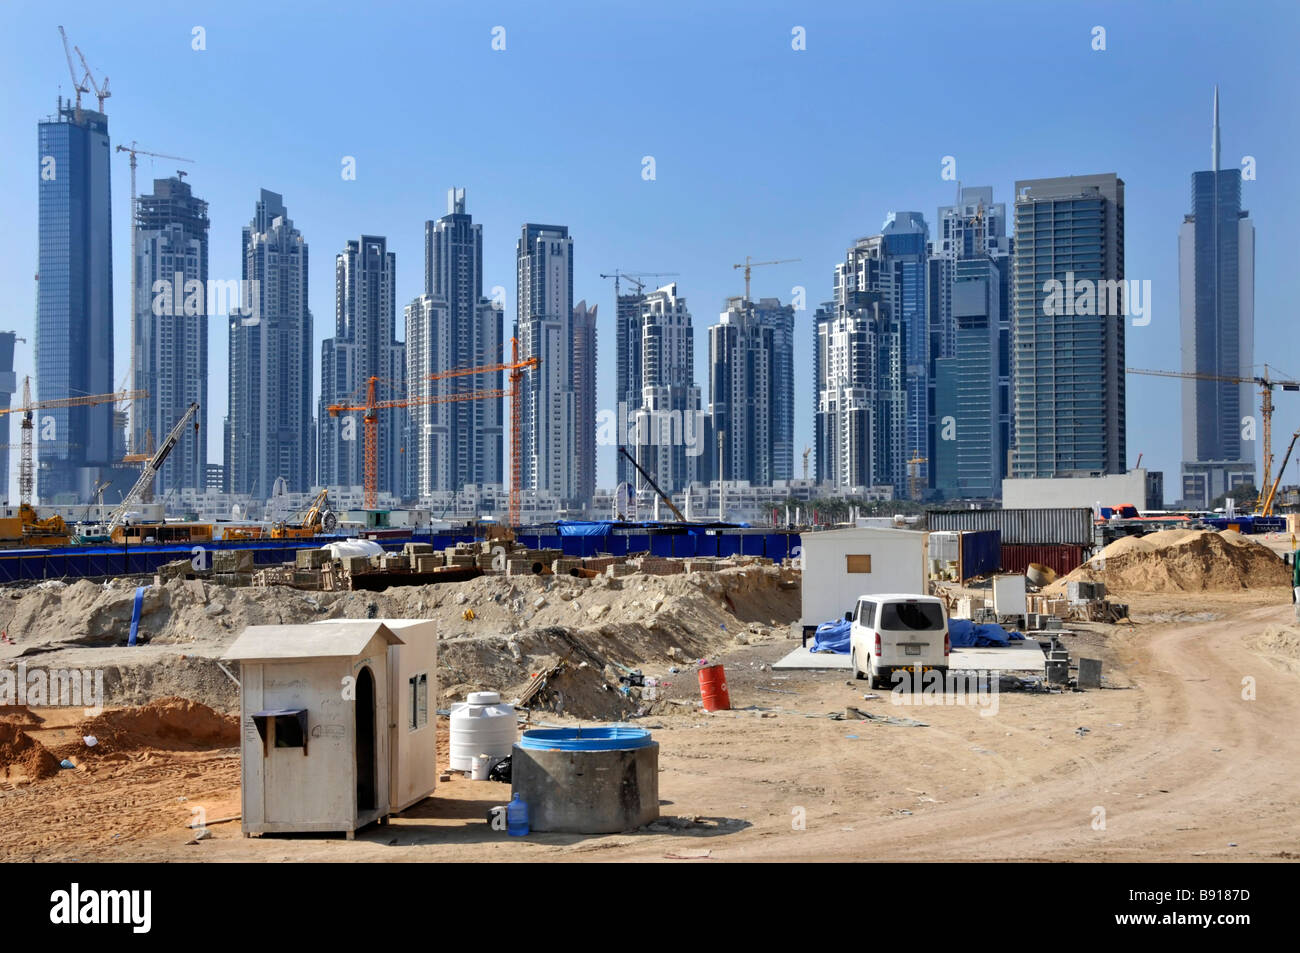 Dubai big construction building site with many high rise skyscrapers some completed some work in progress with cranes in Dubai UAE Middle East Asia Stock Photo